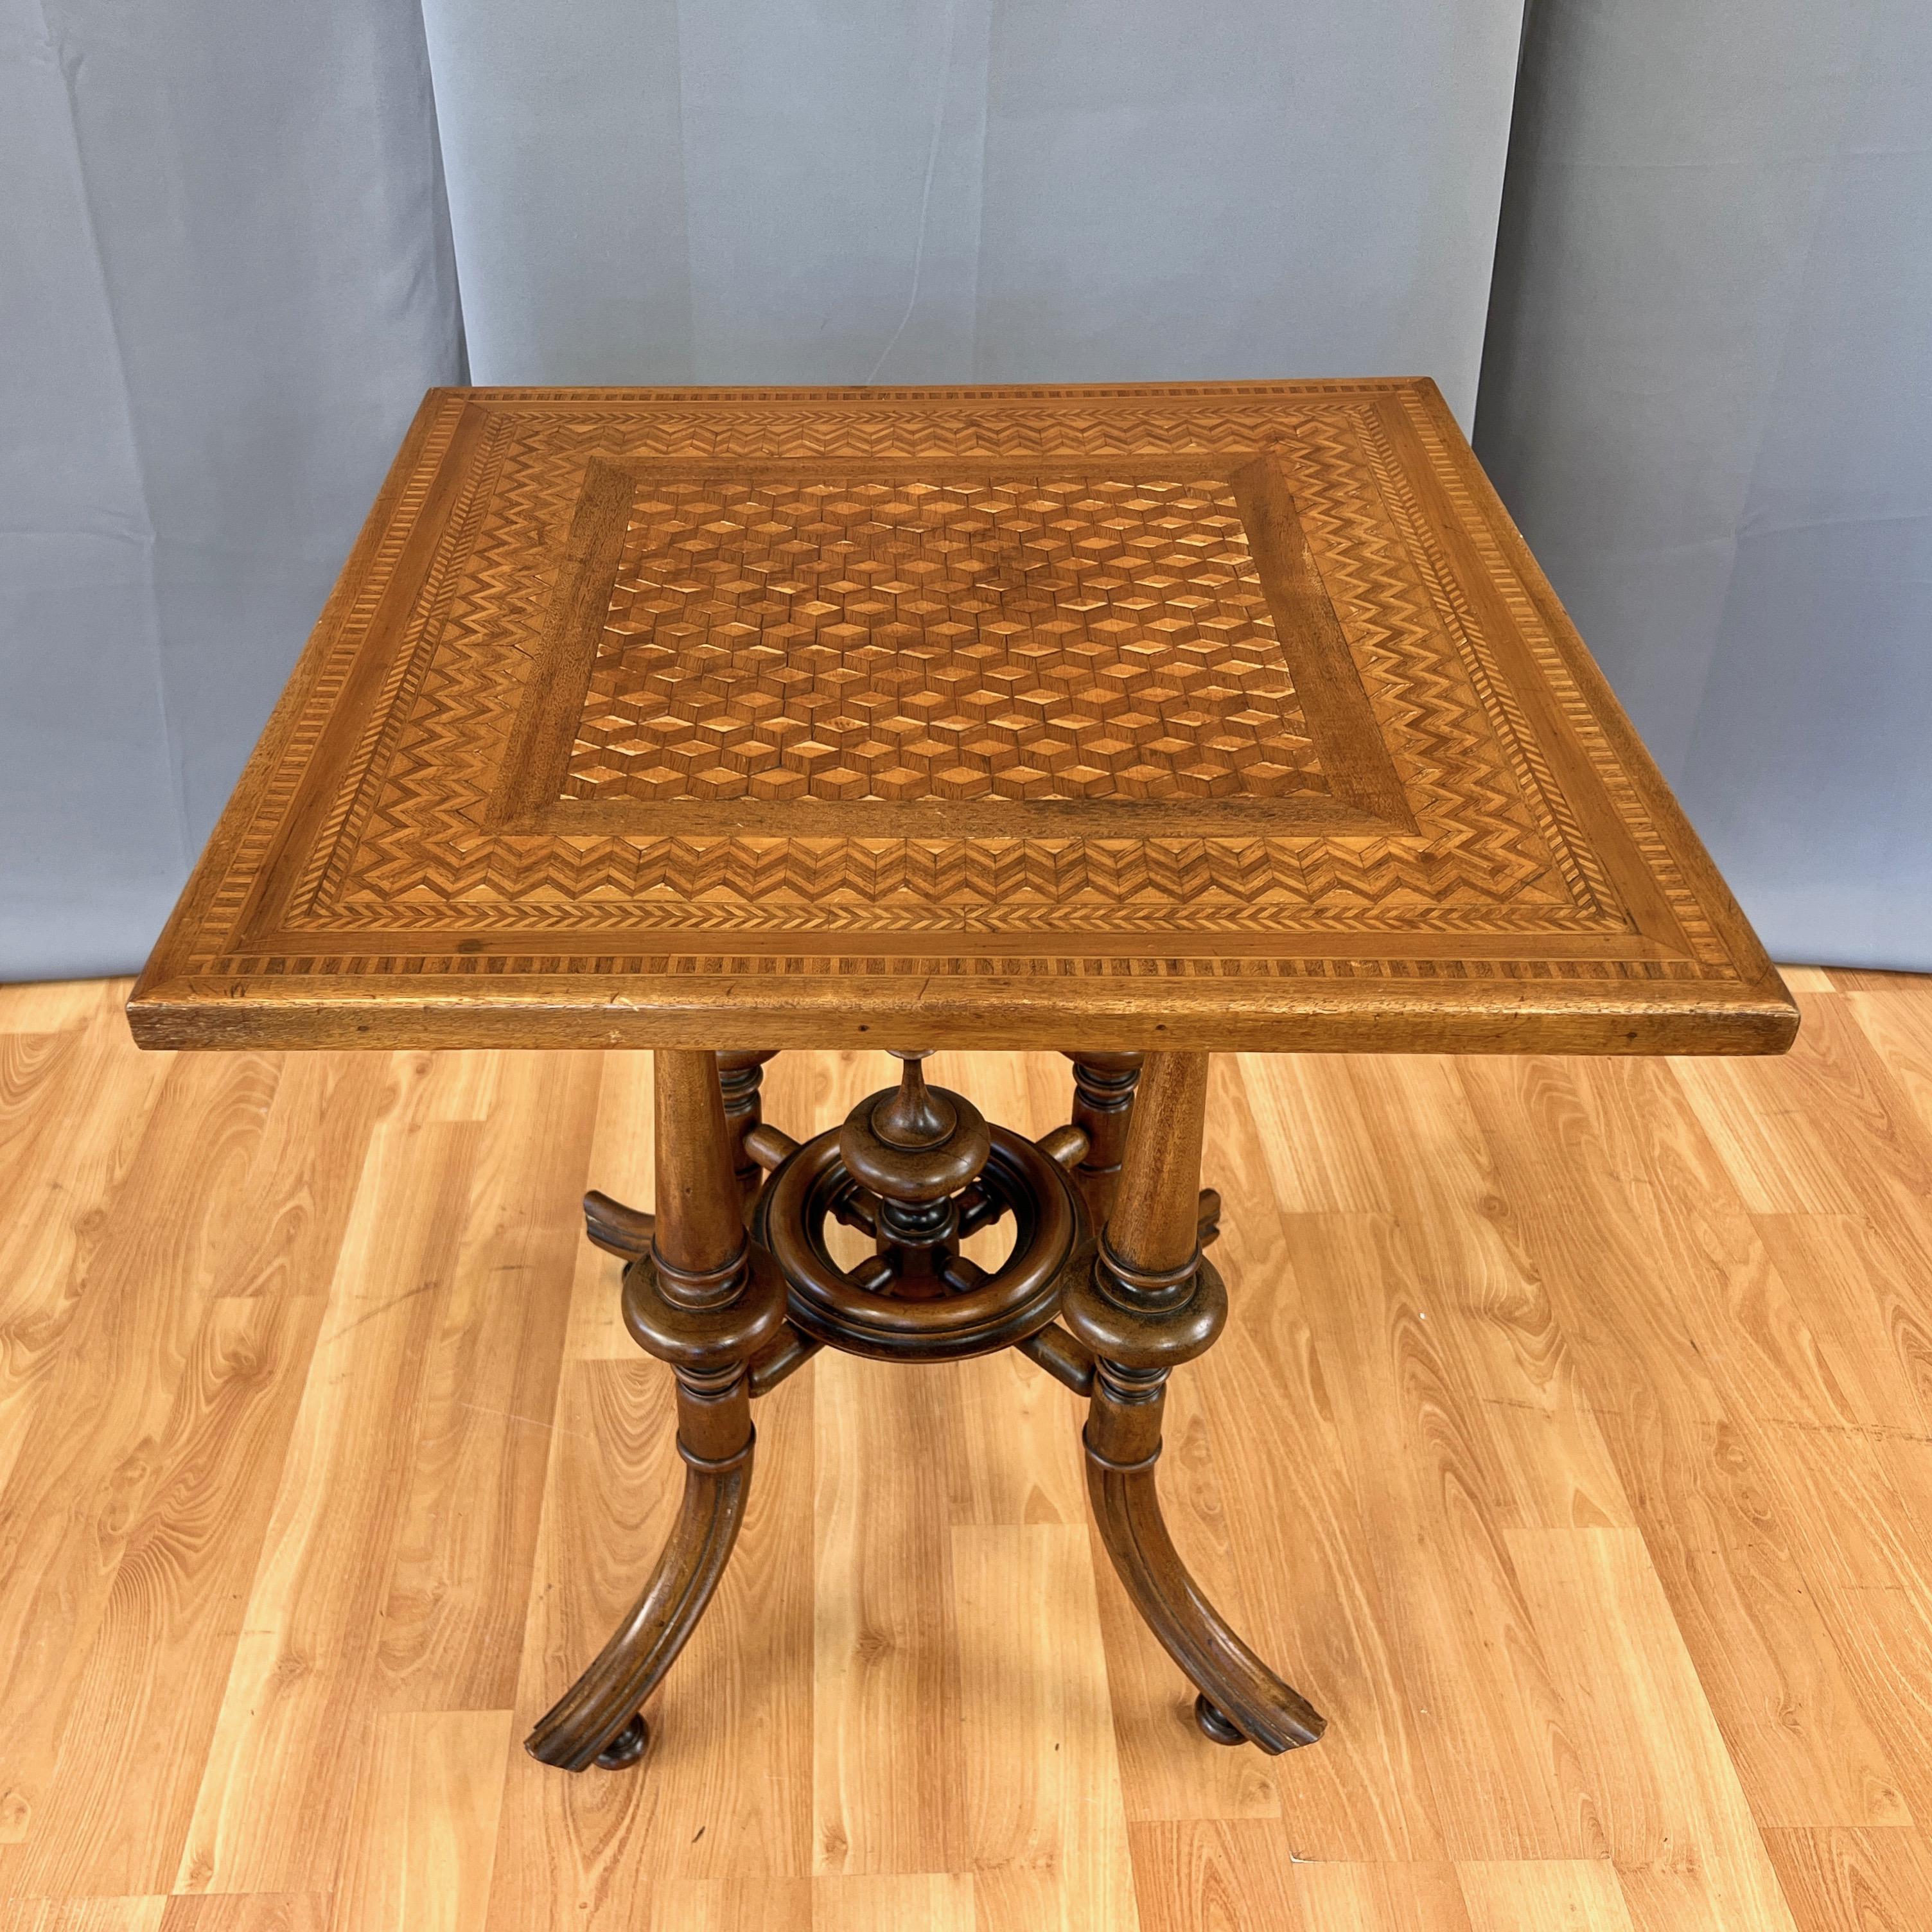 A very well done circa 1900 marquetry top card, game, or occasional table with striking turned wood base.

Fantastic craftsmanship on display from top to bottom, starting with a satinwood and fruitwood veneer marquetry pattern comprised of a field